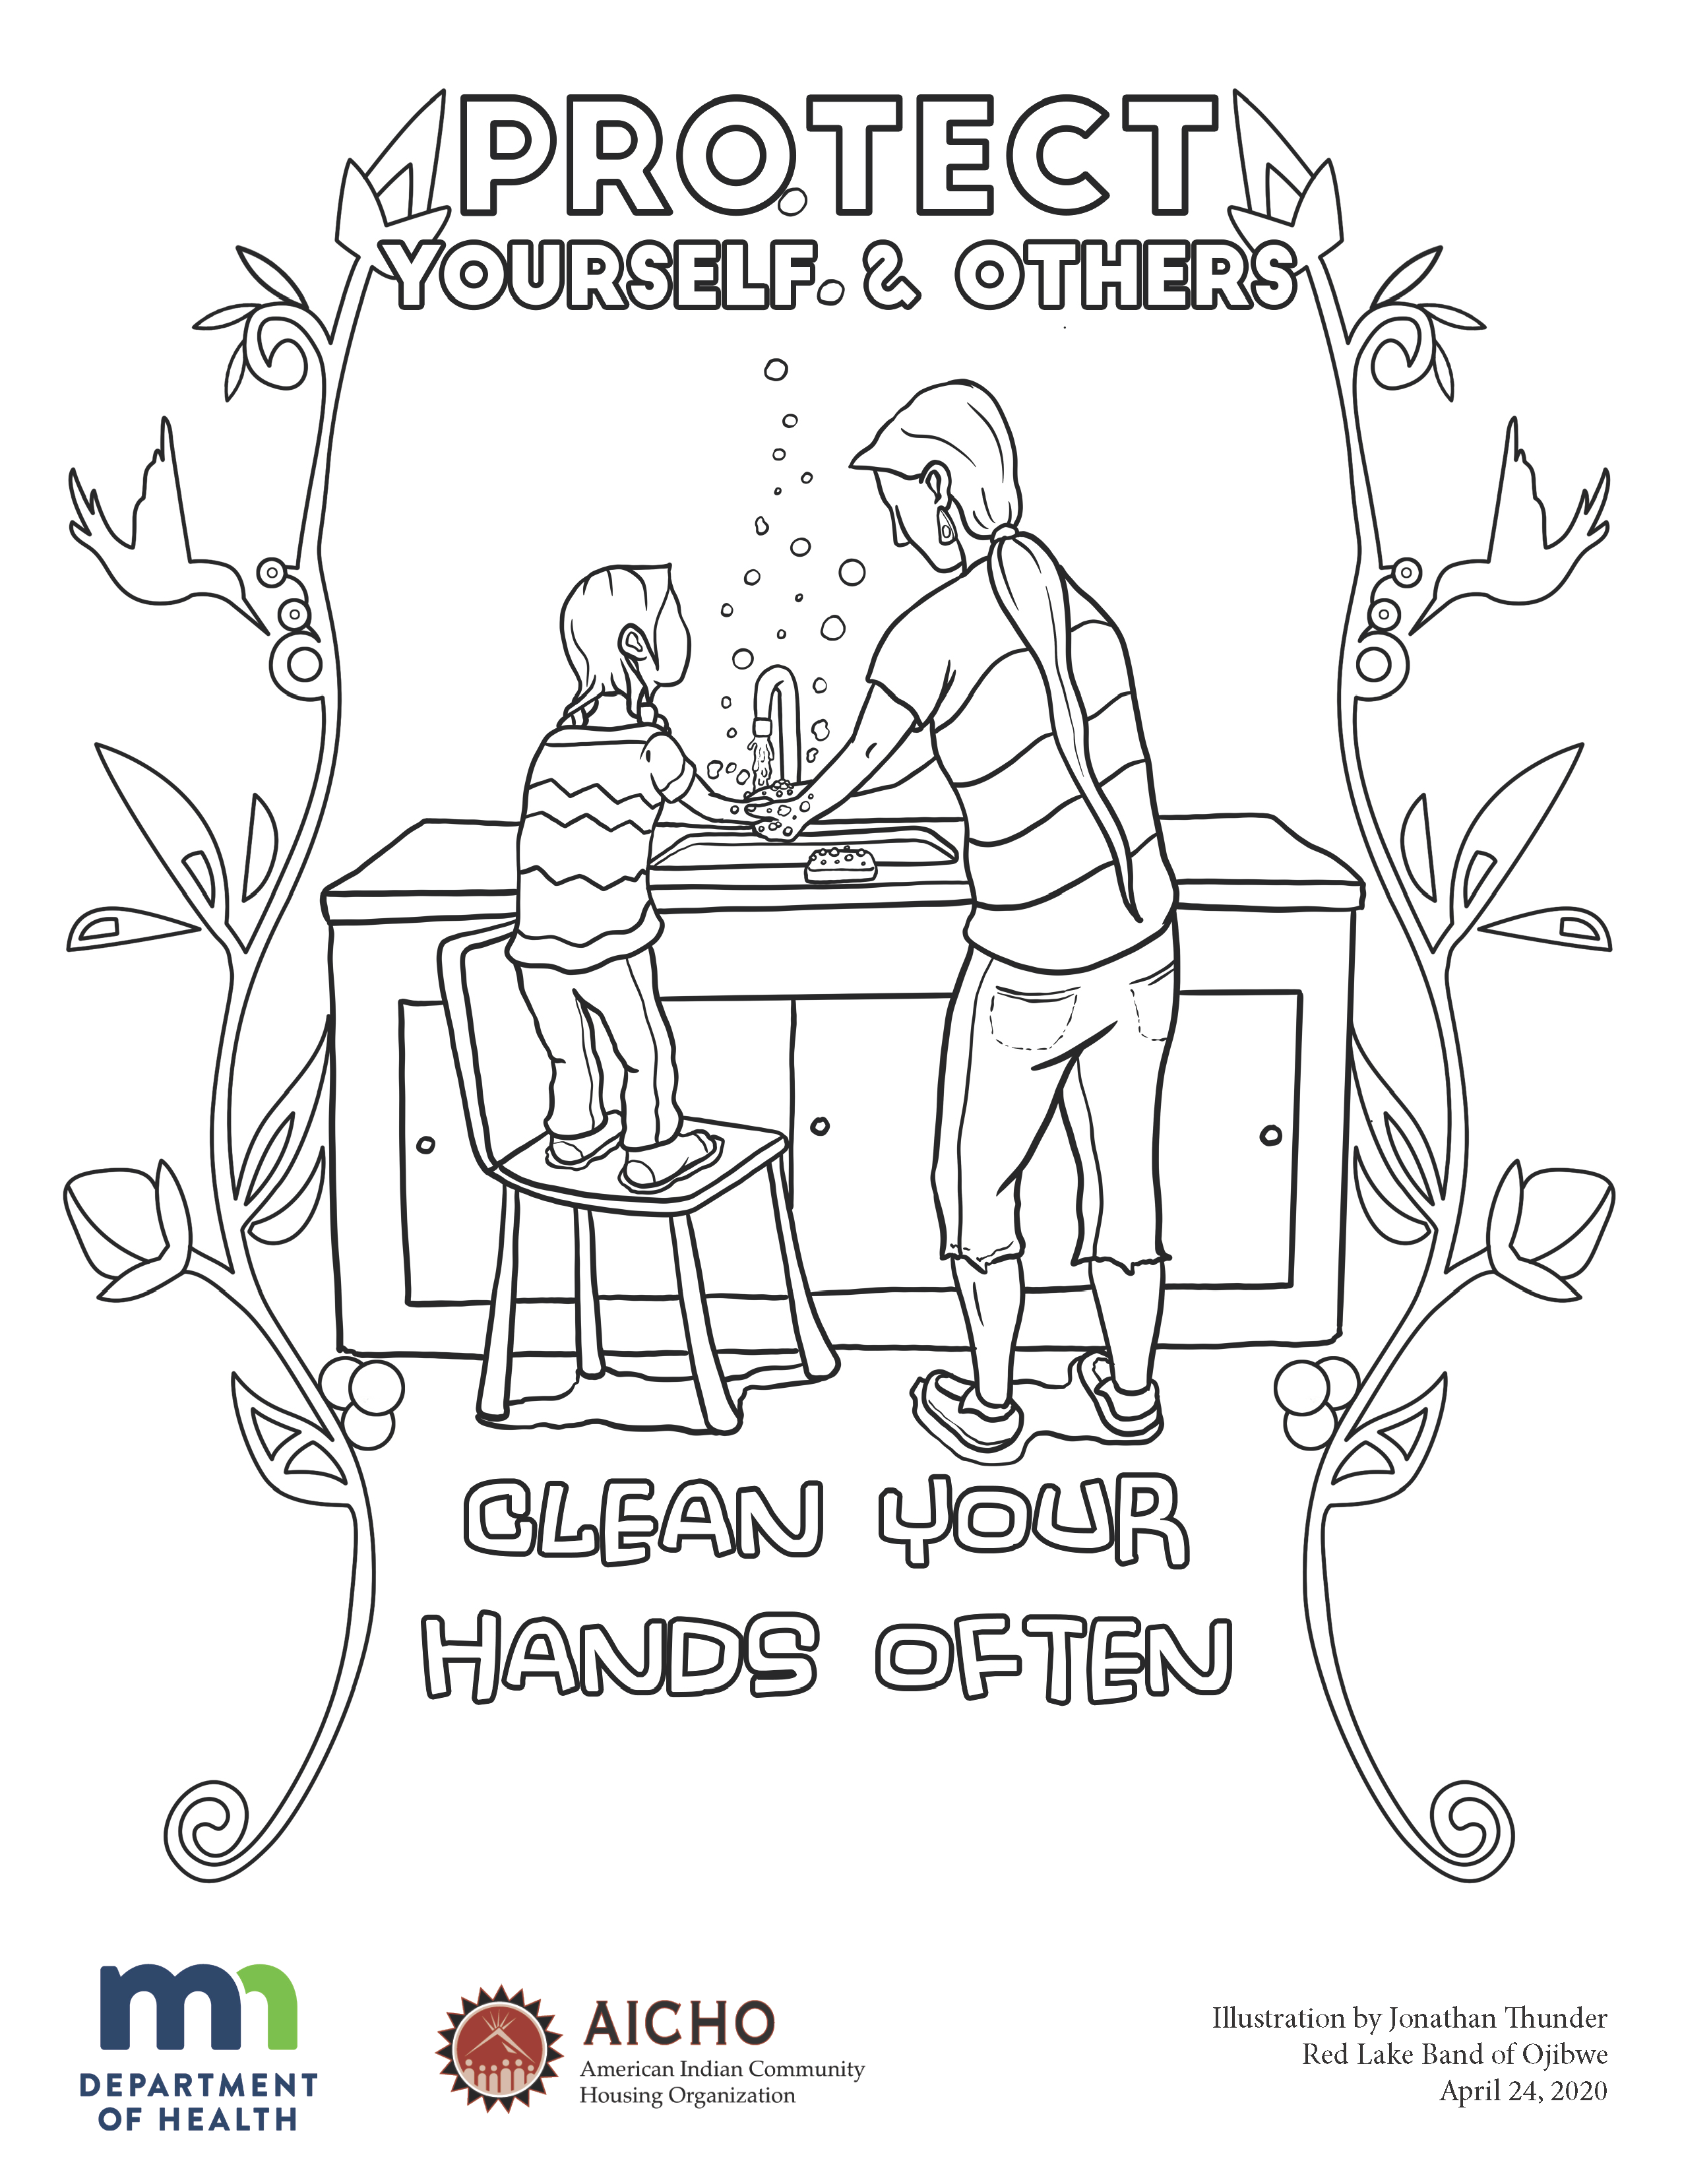 Protect Yourself and Others coloring sheet